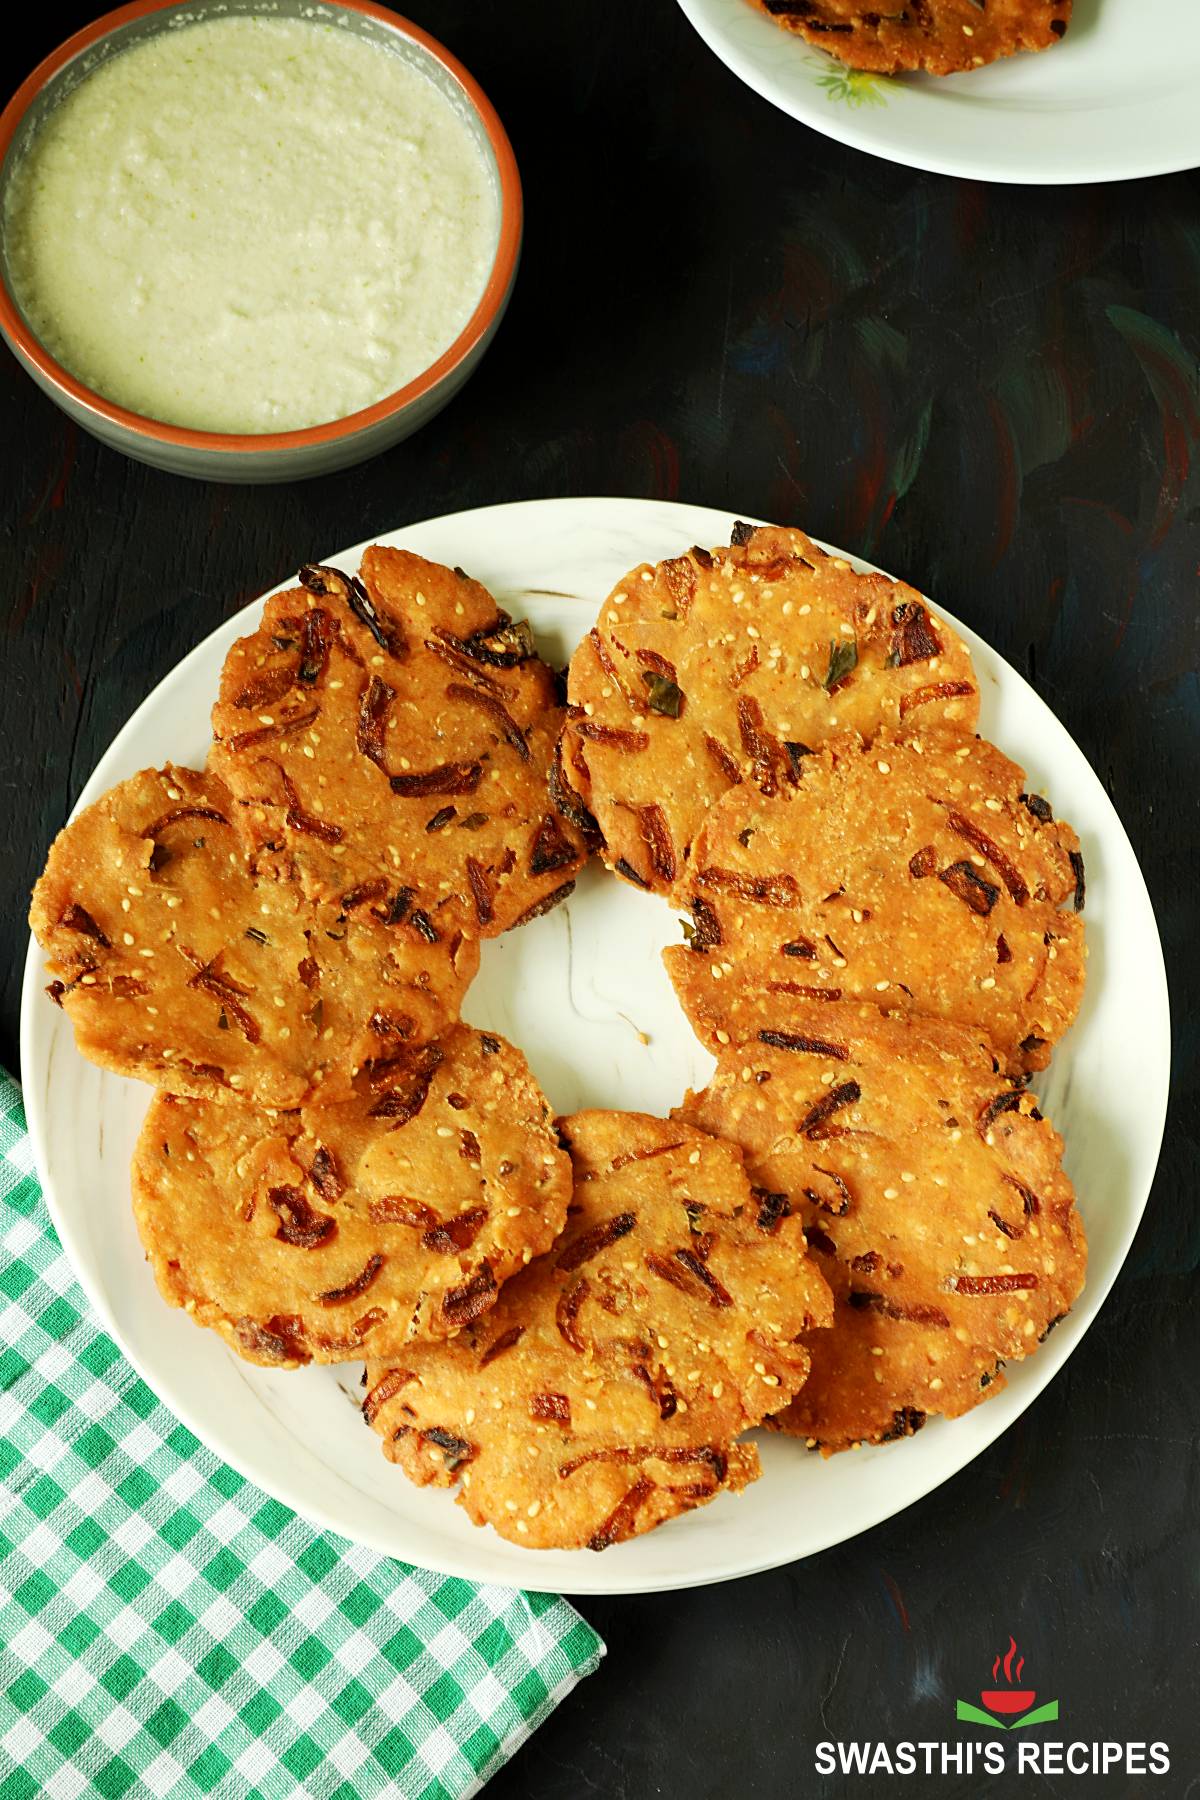 Maddur vada served in a white plate